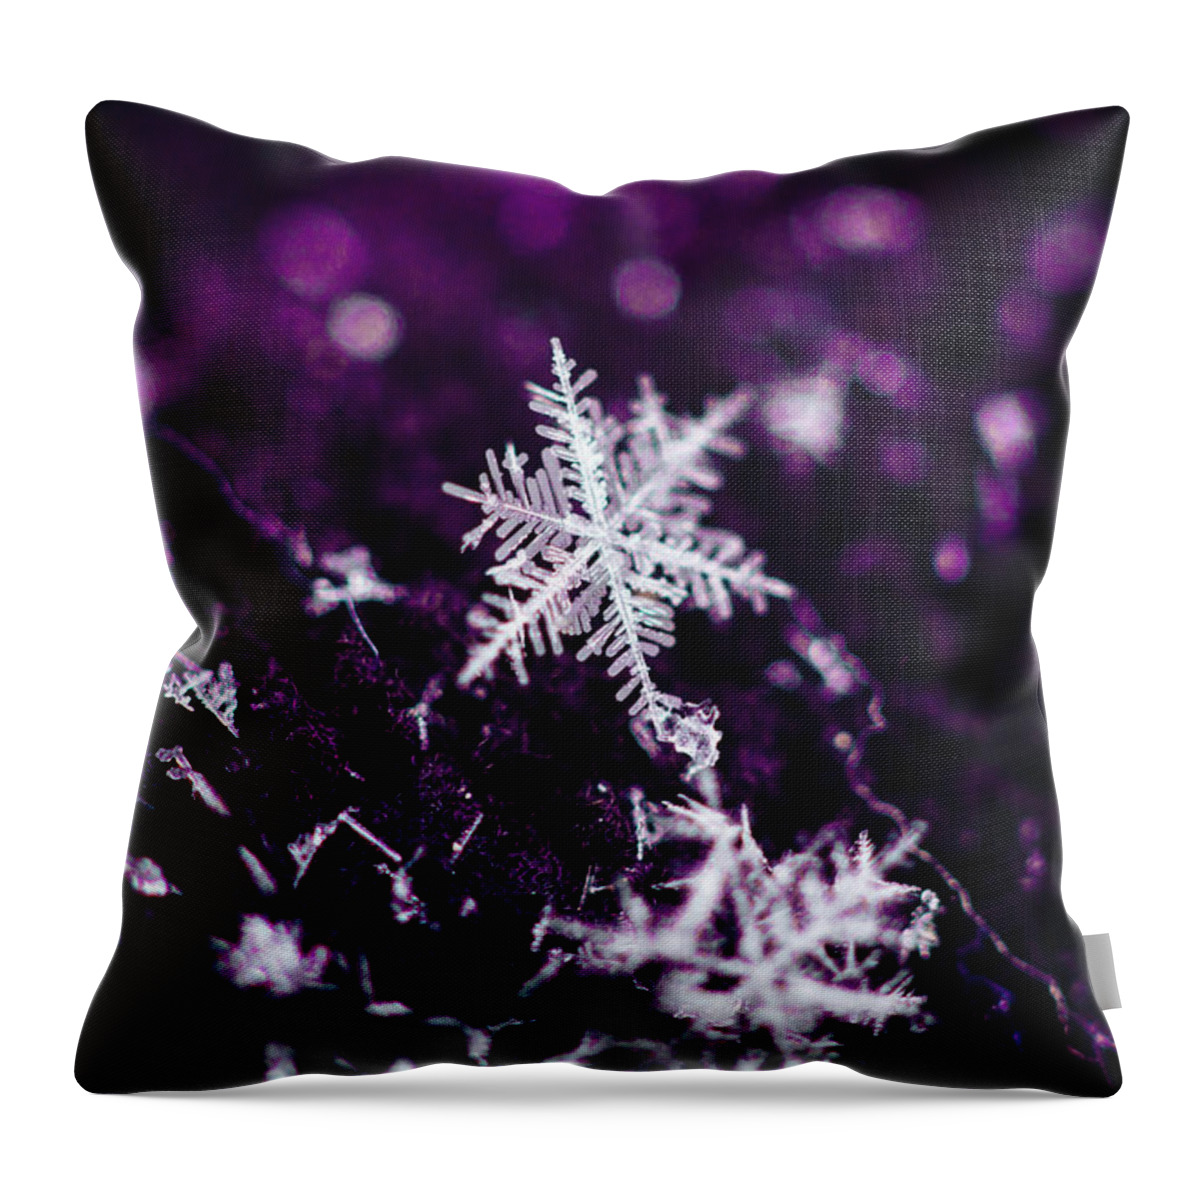  Throw Pillow featuring the photograph Snowflake beauty by Nicole Engstrom